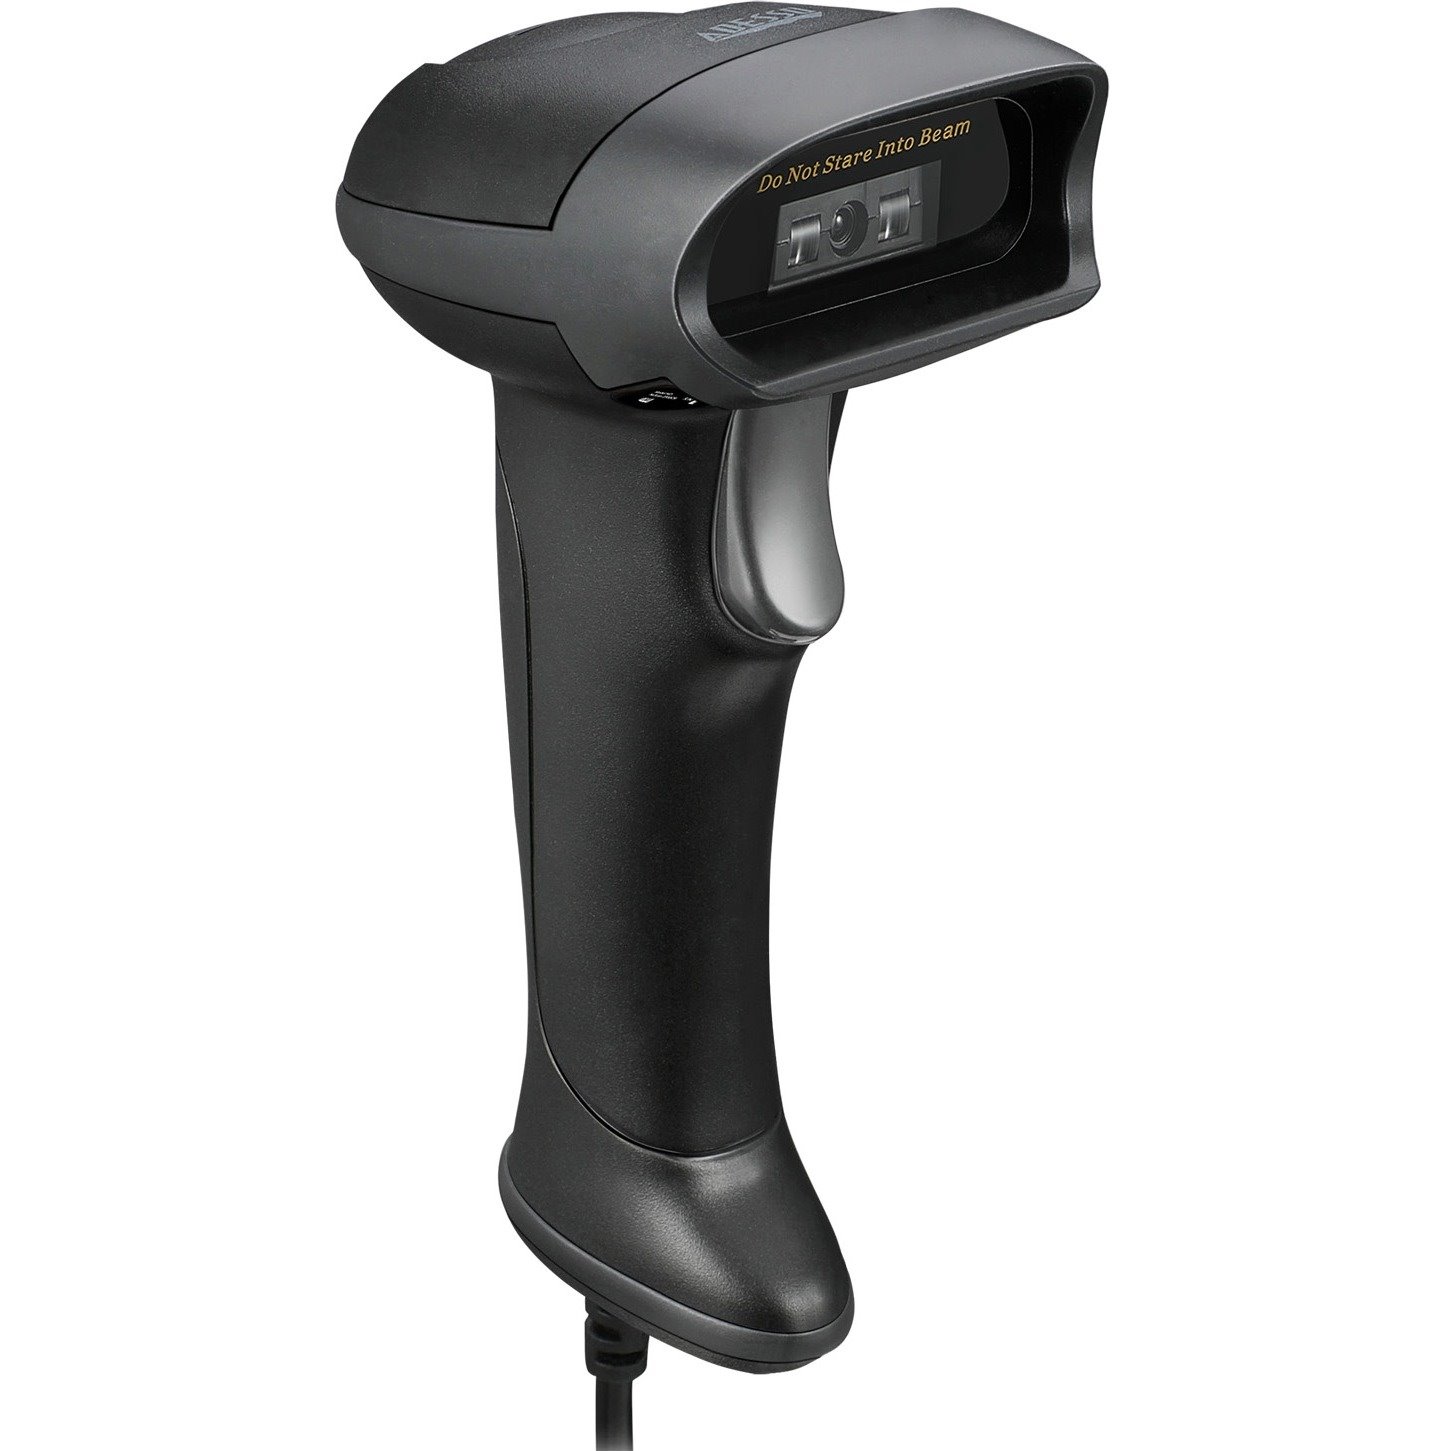 Adesso NuScan NuScan 2500CU Healthcare, Library, Retail, Warehouse Handheld Barcode Scanner - Cable Connectivity - USB Cable Included